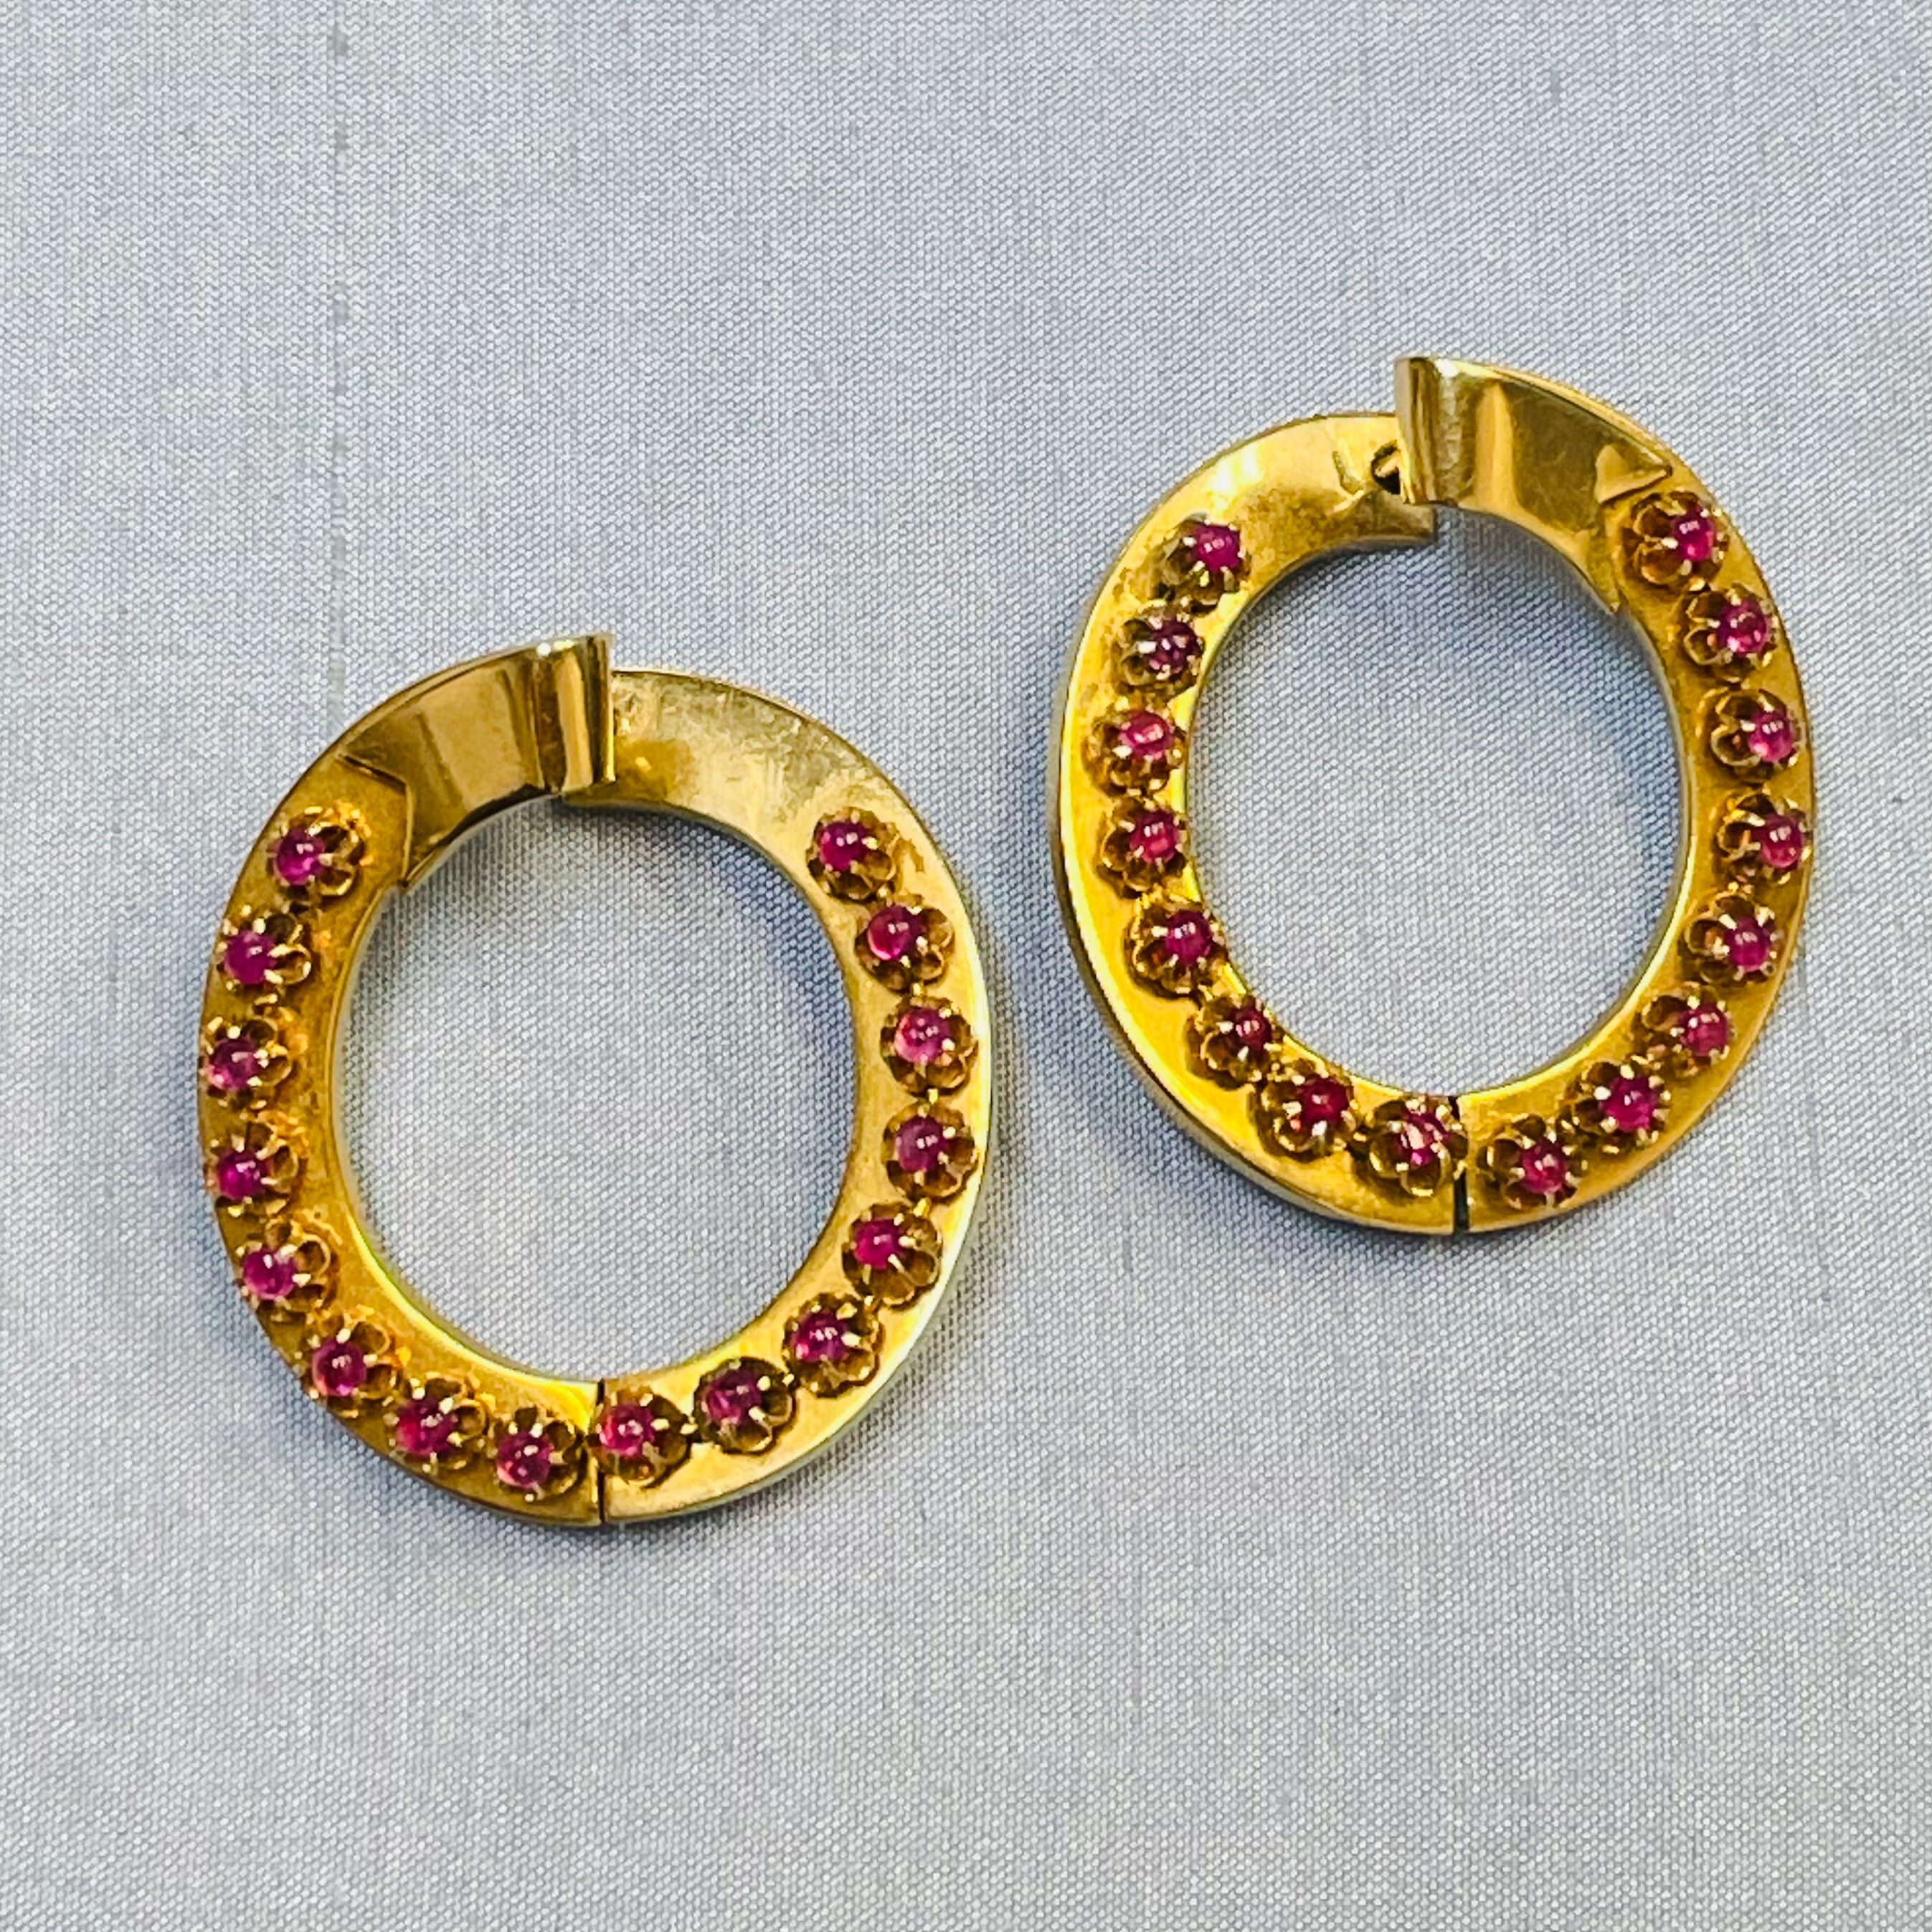 Amazing Natural Burma Ruby Cabochon Antique Victorian Hinged Hoop Earrings